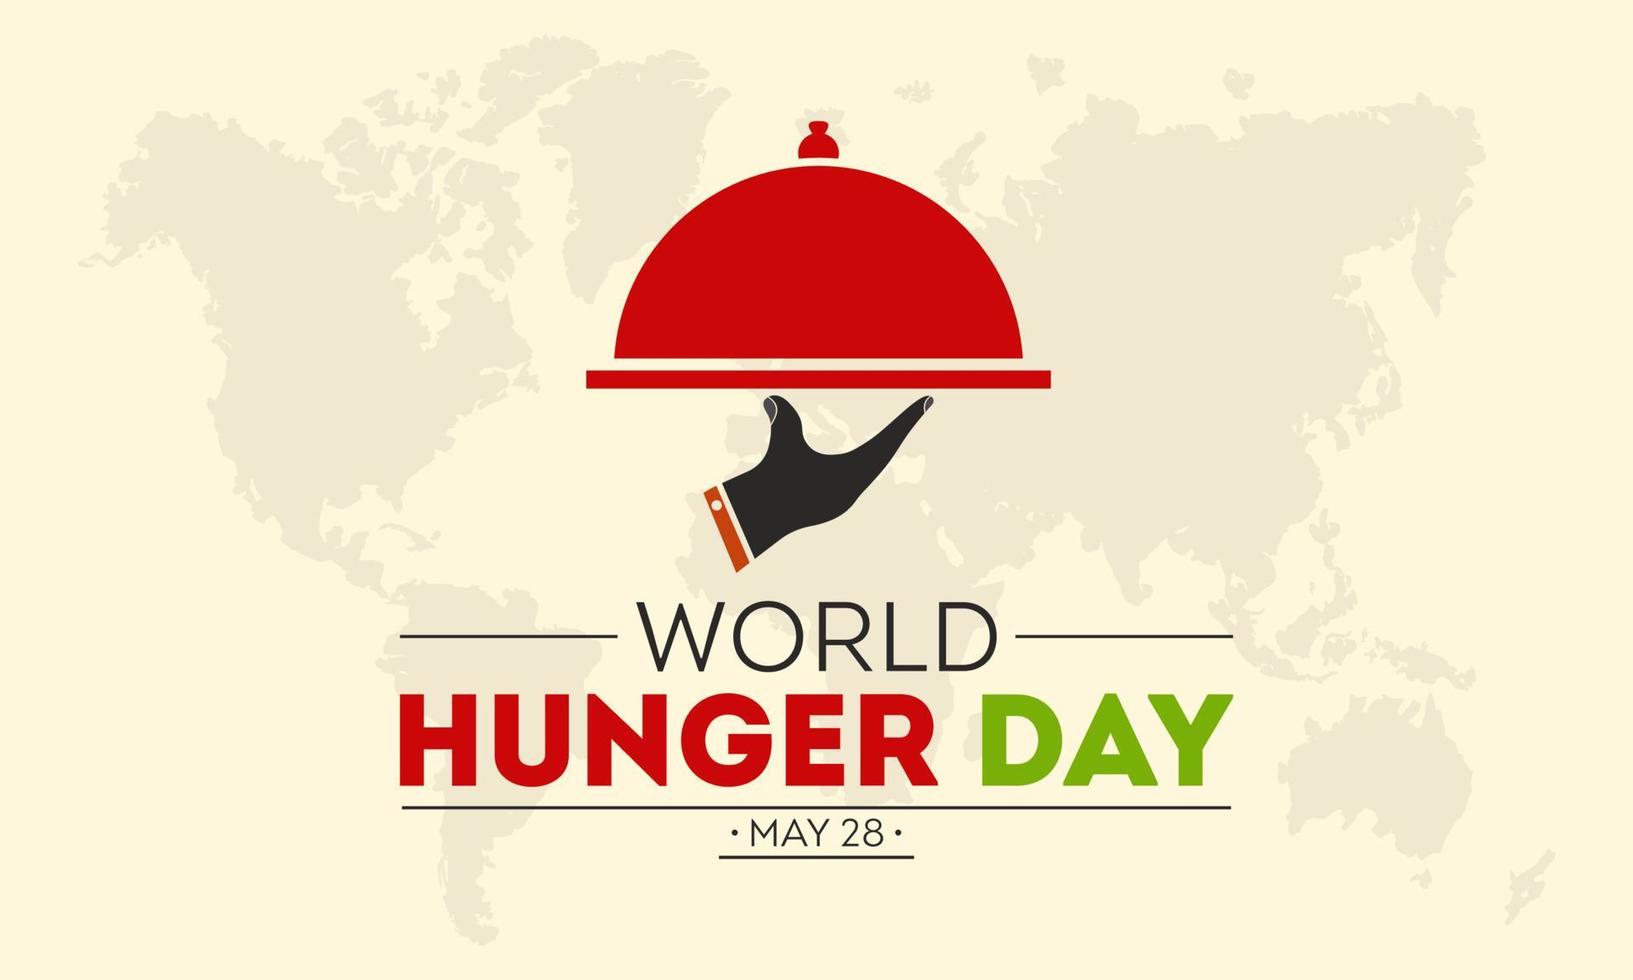 World hunger day is observed every year on 28th may. Vector illustration on the theme of World Hunger day food prevention and awareness vector concept.